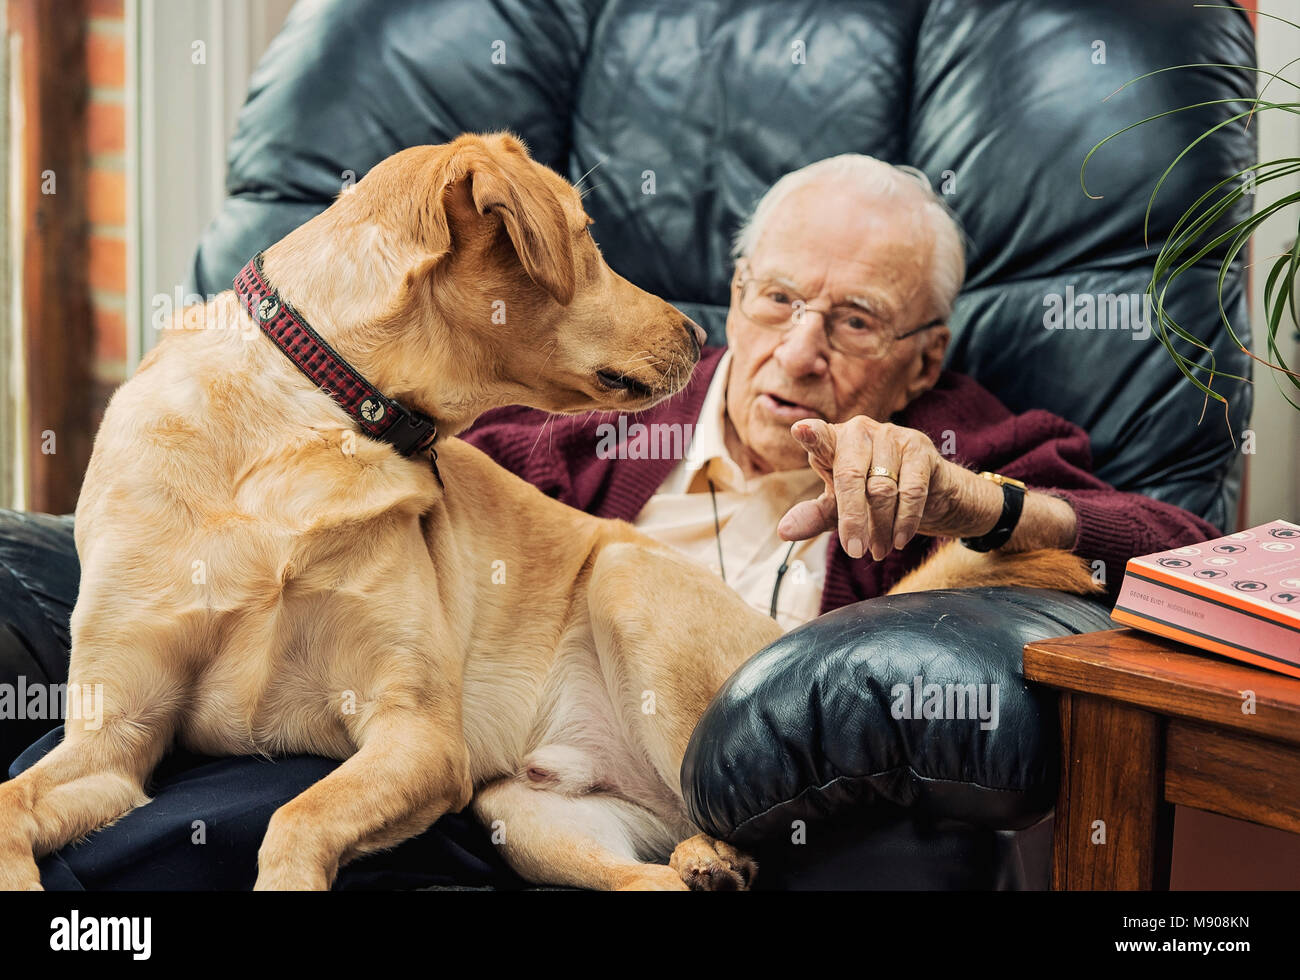 Grandpa with his yellow lab in his lap Stock Photo